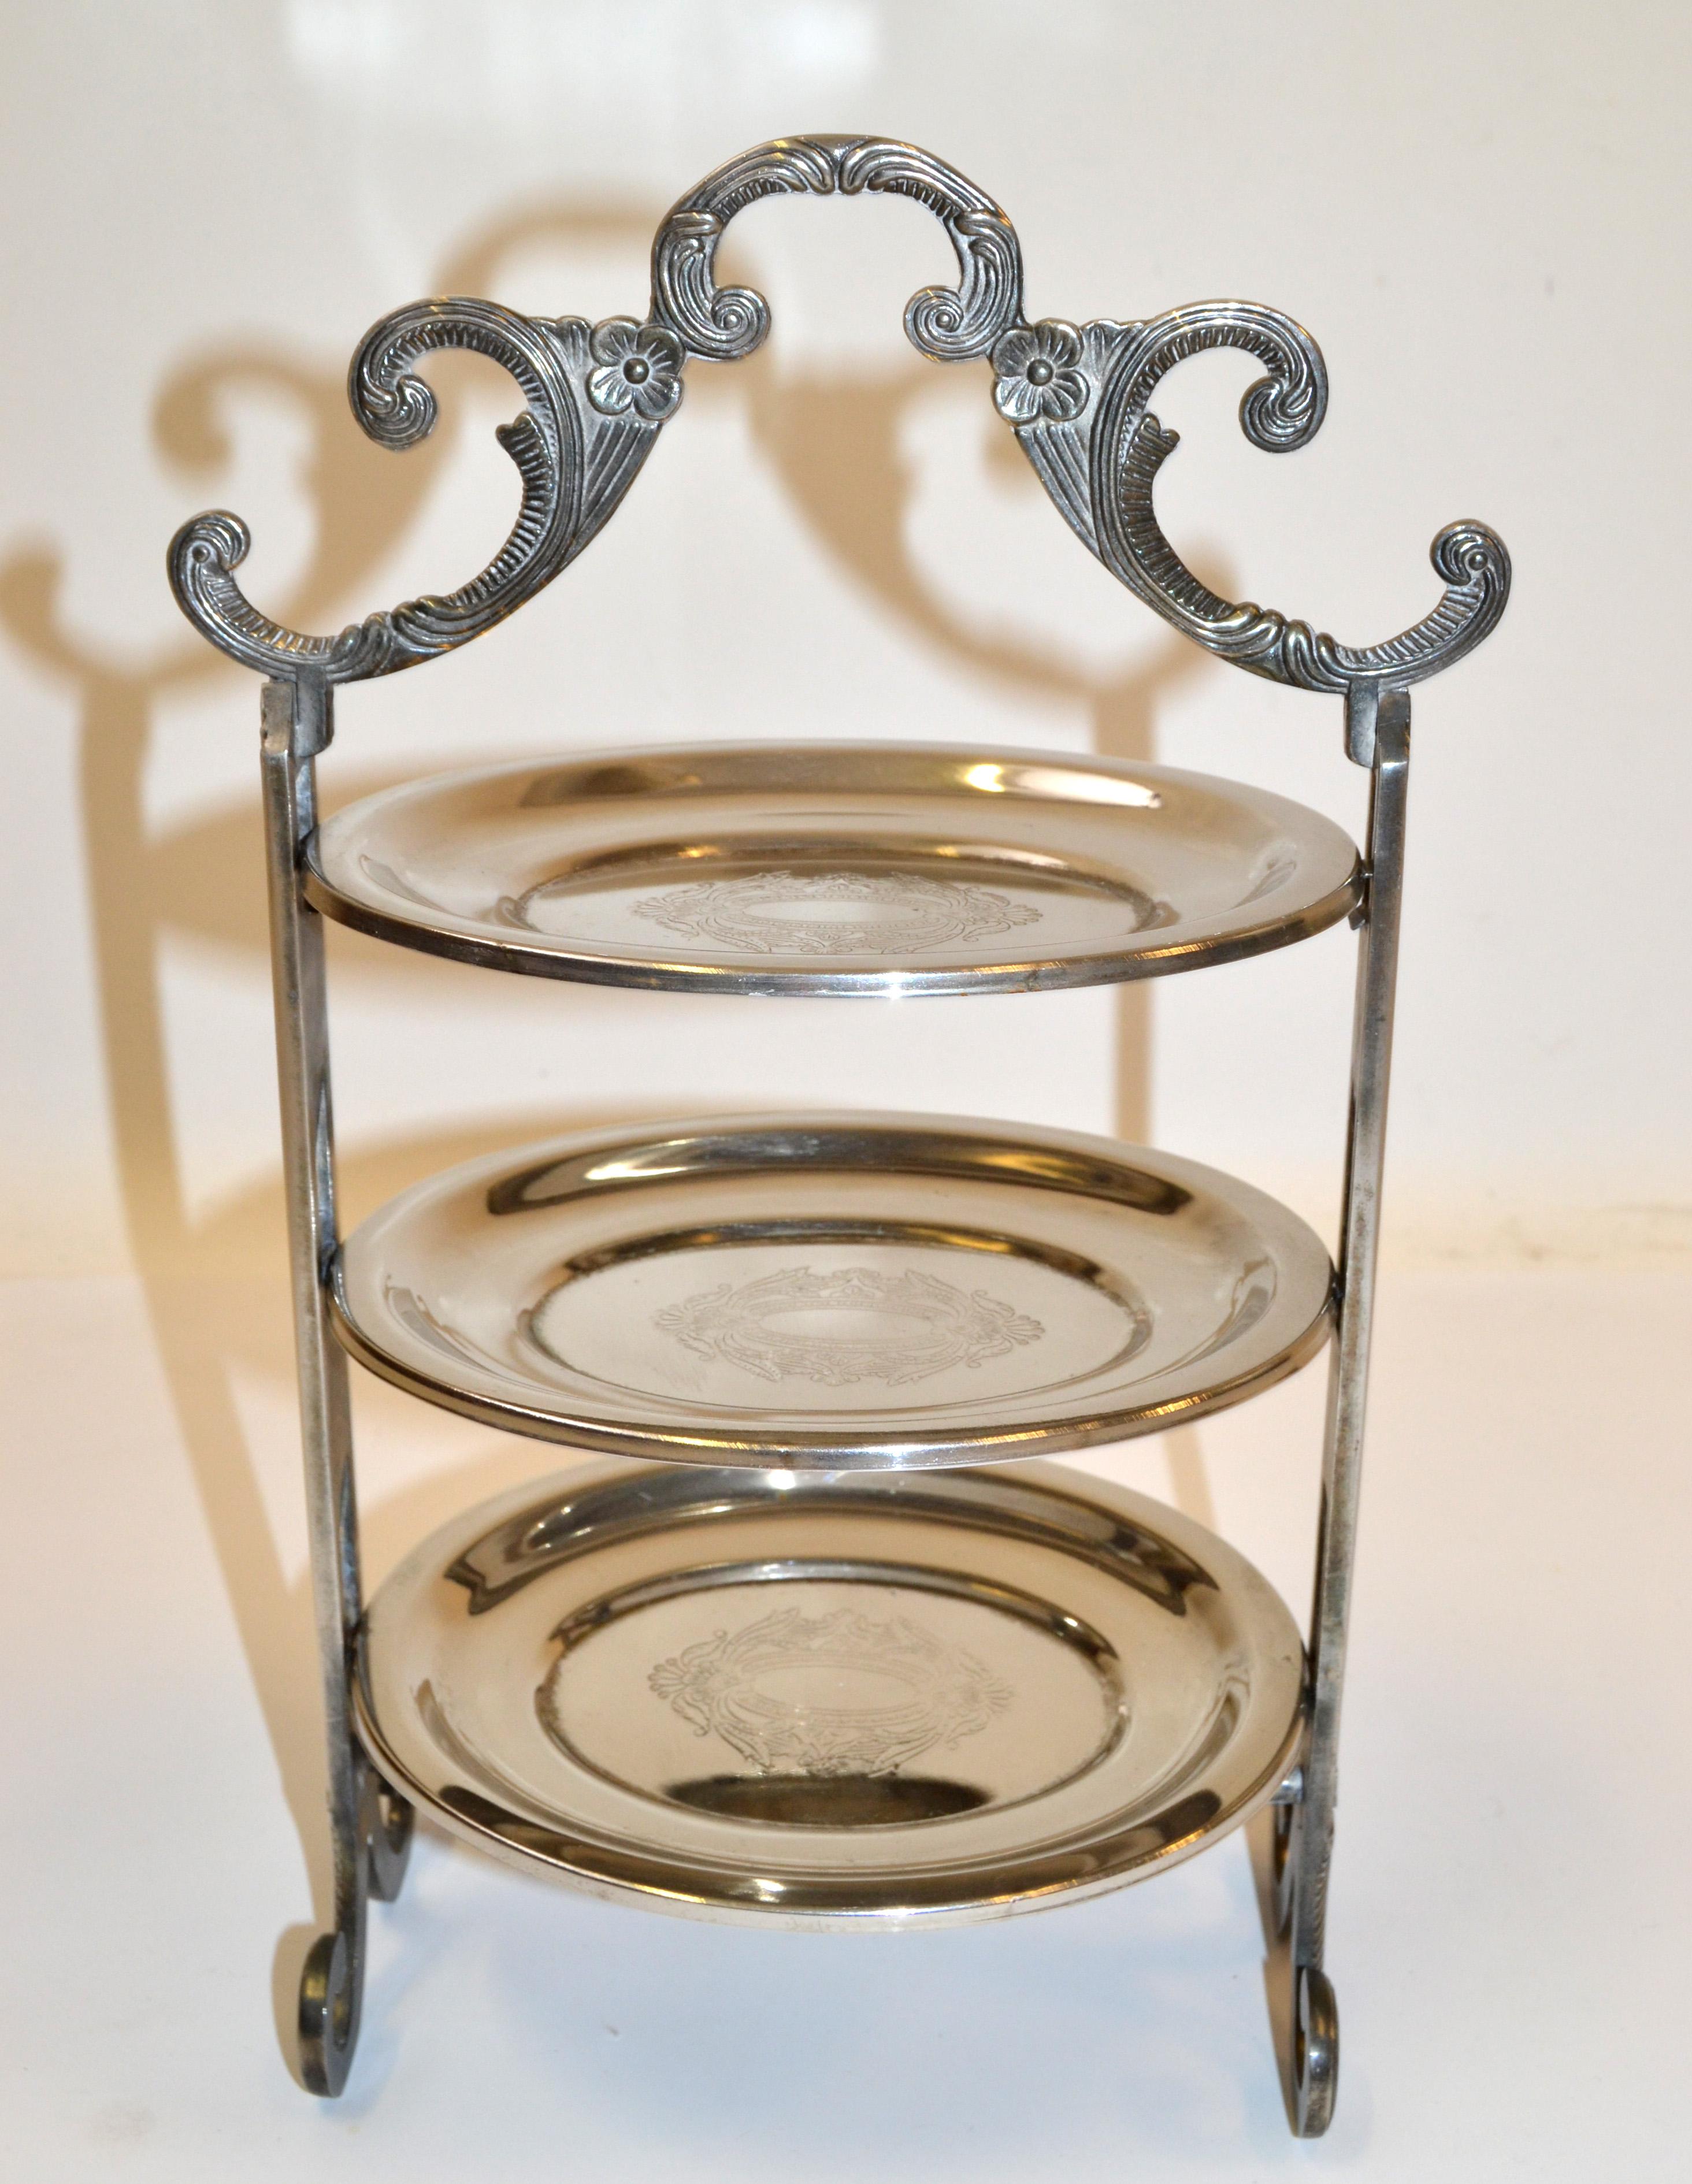 Edwardian Style Three-Tier Silver Plated Cake Stand Patisserie Stand Server Fork 7